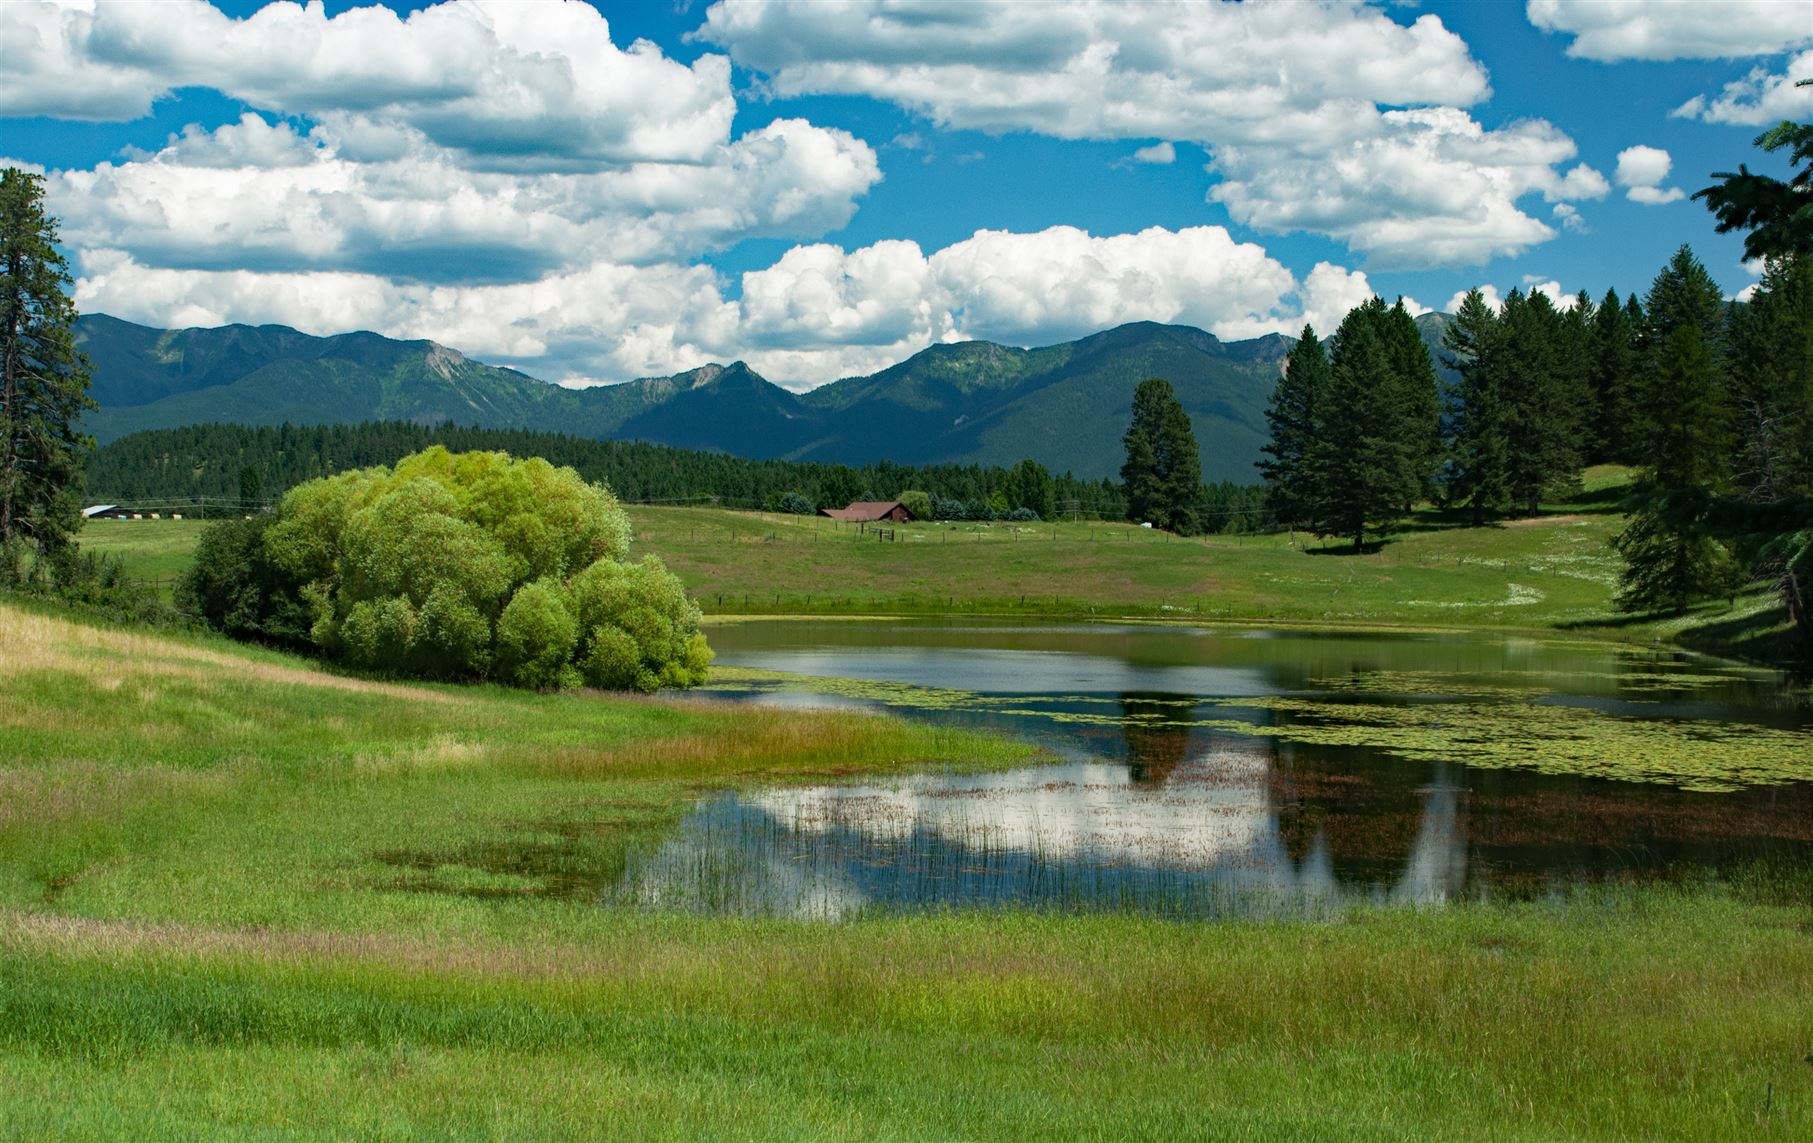 Photograph of field and pond north of Big Fork, MT